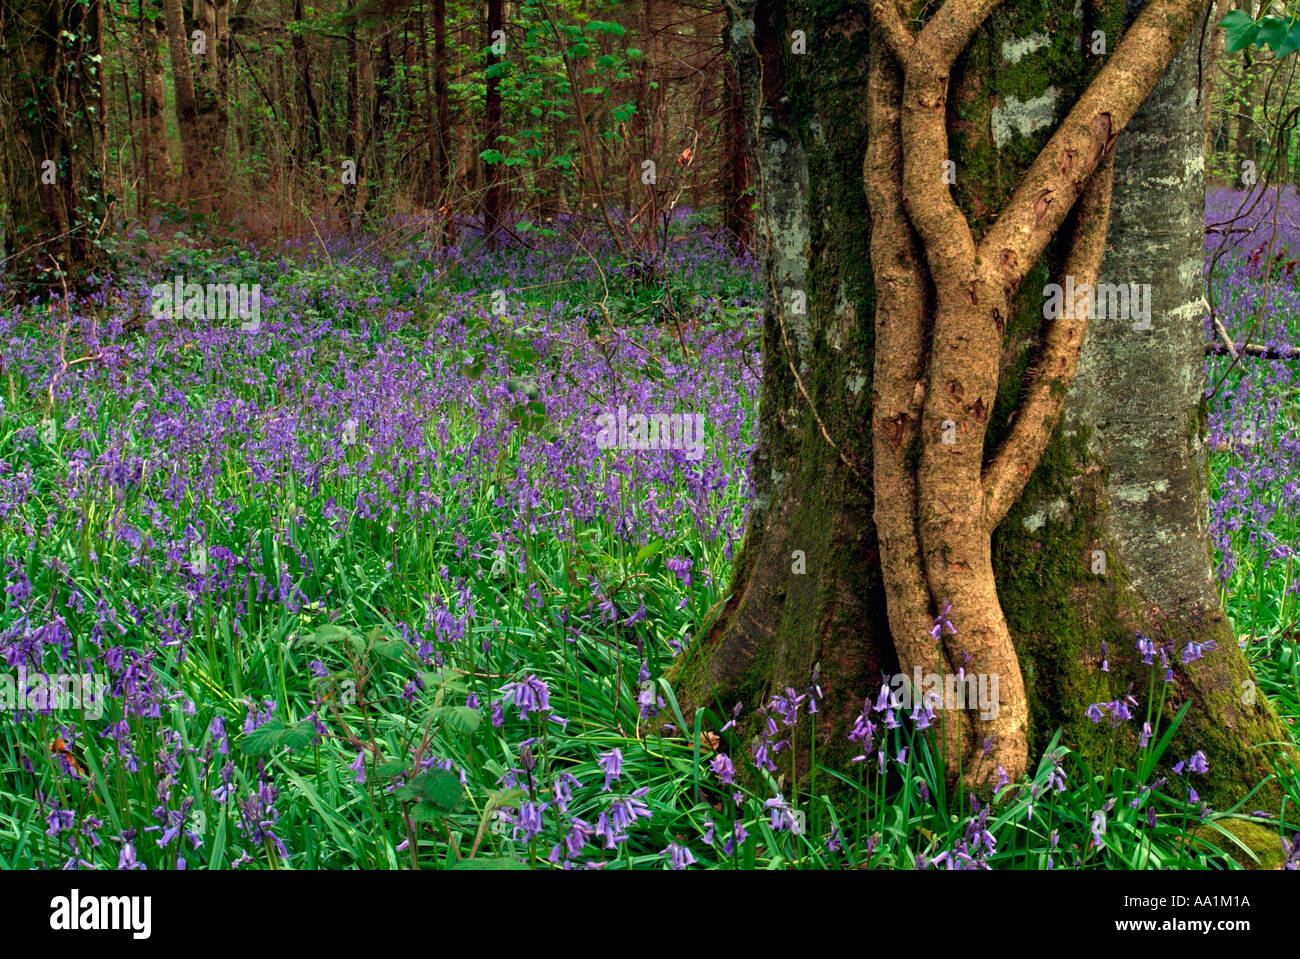 Carpet of bluebells and ivy coated tree trunk in Jenkinstown Wood County Kilkenny Ireland Stock Photo